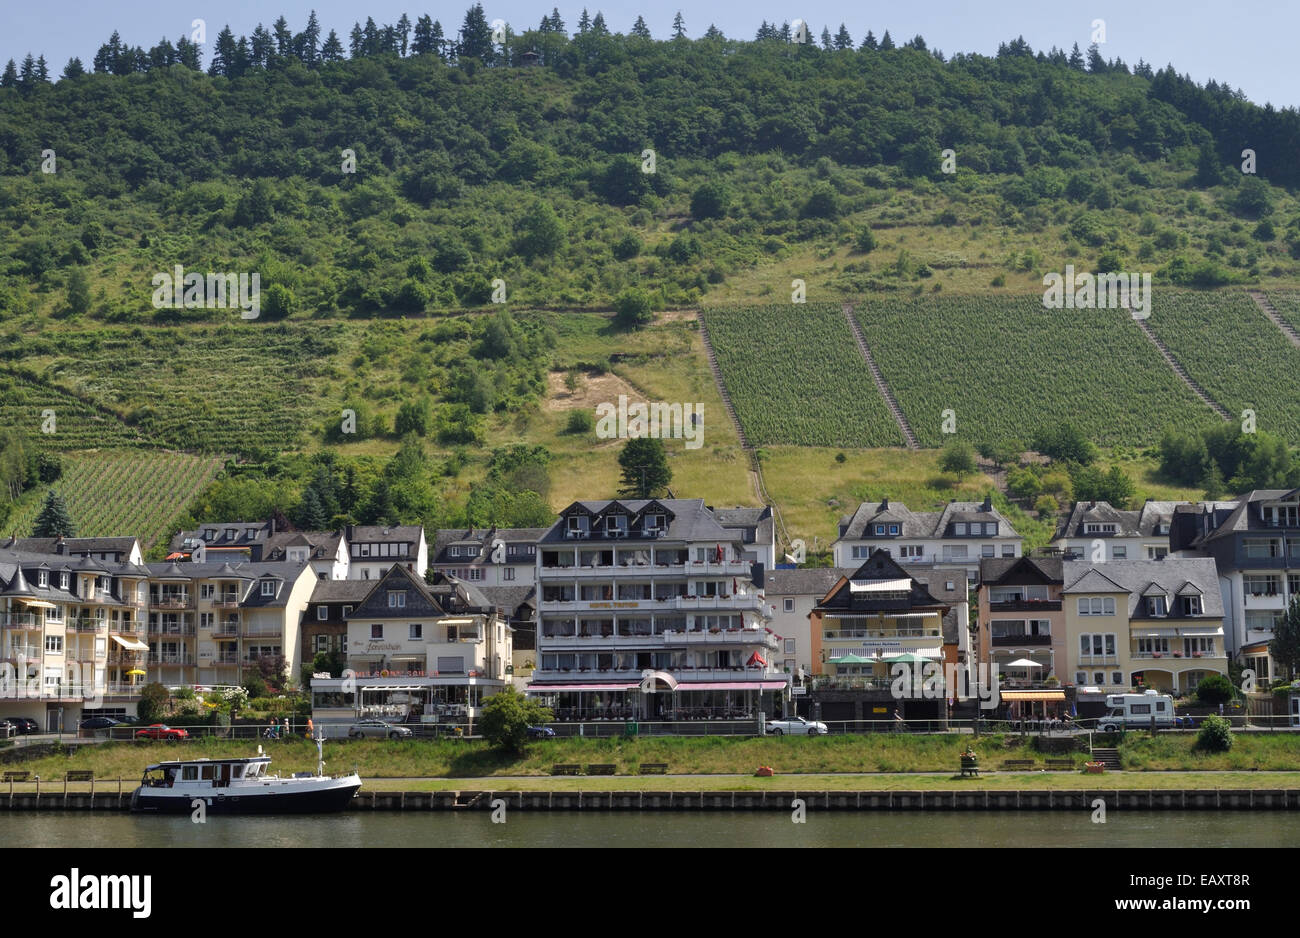 Hotels and guesthouses line the banks of the Moselle in the Cond district of Cochem, Germany. Stock Photo